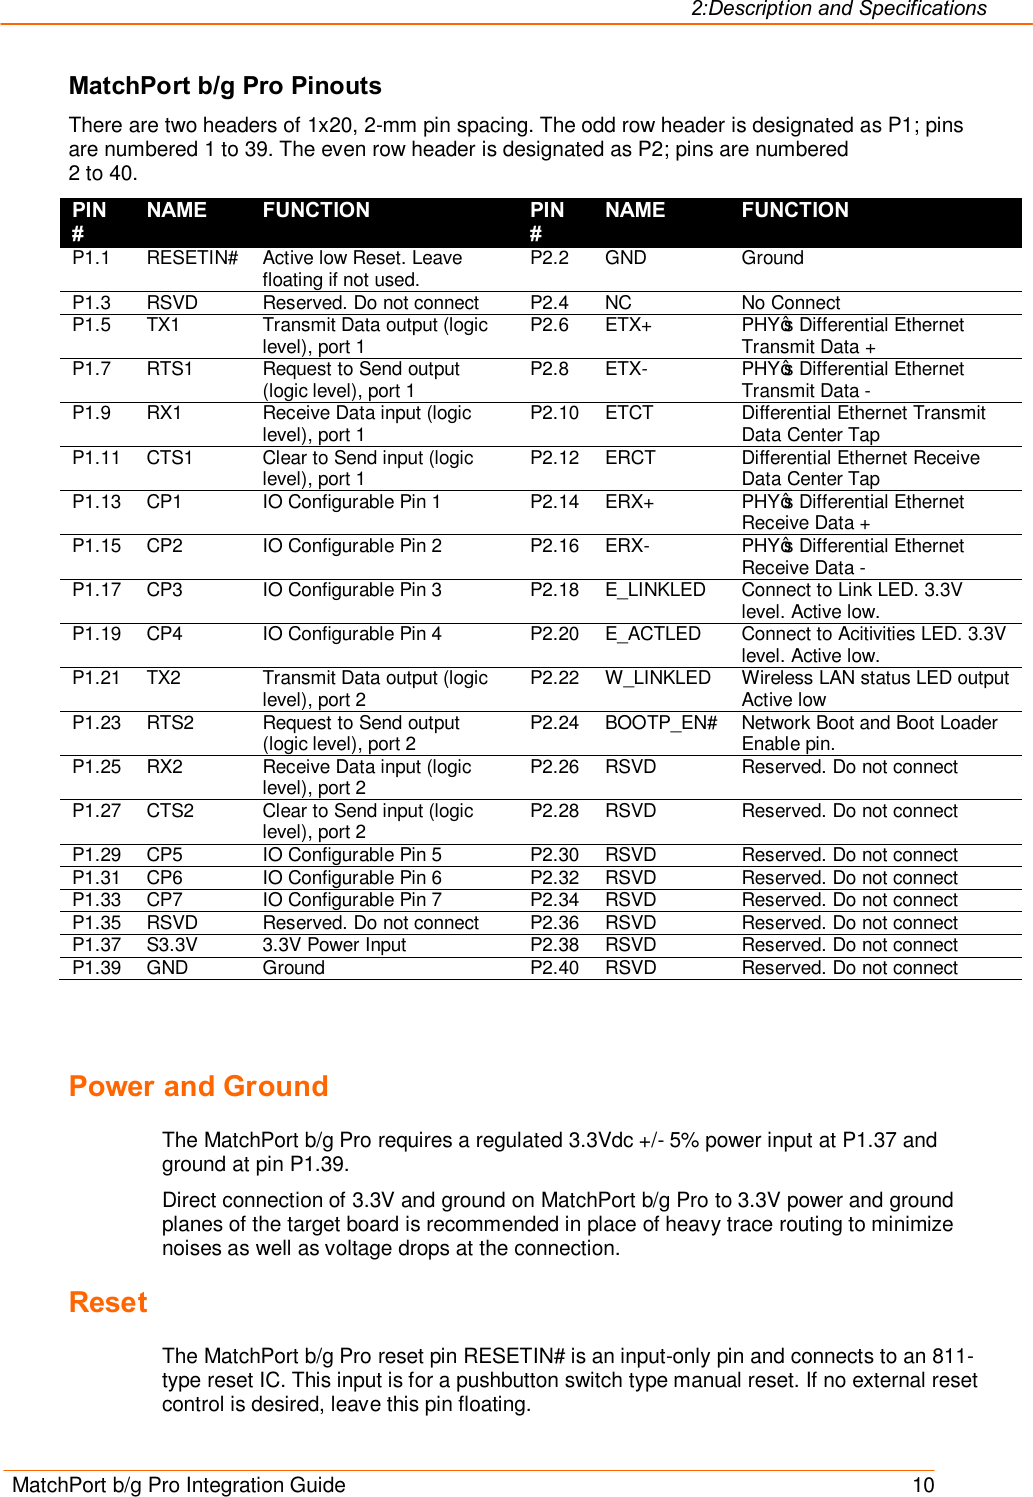 2:Description and Specifications MatchPort b/g Pro Integration Guide    10 MatchPort b/g Pro Pinouts There are two headers of 1x20, 2-mm pin spacing. The odd row header is designated as P1; pins are numbered 1 to 39. The even row header is designated as P2; pins are numbered  2 to 40. PIN # NAME FUNCTION PIN # NAME FUNCTION P1.1  RESETIN#  Active low Reset. Leave floating if not used.  P2.2  GND  Ground P1.3  RSVD  Reserved. Do not connect  P2.4  NC  No Connect P1.5  TX1  Transmit Data output (logic level), port 1  P2.6  ETX+  PHY’s Differential Ethernet Transmit Data + P1.7  RTS1  Request to Send output (logic level), port 1  P2.8  ETX-  PHY’s Differential Ethernet Transmit Data - P1.9  RX1  Receive Data input (logic level), port 1  P2.10  ETCT  Differential Ethernet Transmit Data Center Tap P1.11  CTS1  Clear to Send input (logic level), port 1  P2.12  ERCT  Differential Ethernet Receive Data Center Tap P1.13  CP1  IO Configurable Pin 1  P2.14  ERX+  PHY’s Differential Ethernet Receive Data + P1.15  CP2  IO Configurable Pin 2  P2.16  ERX-  PHY’s Differential Ethernet Receive Data - P1.17  CP3  IO Configurable Pin 3  P2.18  E_LINKLED  Connect to Link LED. 3.3V level. Active low. P1.19  CP4  IO Configurable Pin 4  P2.20  E_ACTLED  Connect to Acitivities LED. 3.3V level. Active low. P1.21  TX2  Transmit Data output (logic level), port 2  P2.22  W_LINKLED  Wireless LAN status LED output Active low P1.23  RTS2  Request to Send output (logic level), port 2  P2.24  BOOTP_EN#  Network Boot and Boot Loader Enable pin. P1.25  RX2  Receive Data input (logic level), port 2  P2.26  RSVD  Reserved. Do not connect P1.27  CTS2  Clear to Send input (logic level), port 2  P2.28  RSVD  Reserved. Do not connect P1.29  CP5  IO Configurable Pin 5  P2.30  RSVD  Reserved. Do not connect P1.31  CP6  IO Configurable Pin 6  P2.32  RSVD  Reserved. Do not connect P1.33  CP7  IO Configurable Pin 7  P2.34  RSVD  Reserved. Do not connect P1.35  RSVD  Reserved. Do not connect  P2.36  RSVD  Reserved. Do not connect P1.37  S3.3V  3.3V Power Input  P2.38  RSVD  Reserved. Do not connect P1.39  GND  Ground  P2.40  RSVD  Reserved. Do not connect    Power and Ground The MatchPort b/g Pro requires a regulated 3.3Vdc +/- 5% power input at P1.37 and ground at pin P1.39. Direct connection of 3.3V and ground on MatchPort b/g Pro to 3.3V power and ground planes of the target board is recommended in place of heavy trace routing to minimize noises as well as voltage drops at the connection. Reset The MatchPort b/g Pro reset pin RESETIN# is an input-only pin and connects to an 811-type reset IC. This input is for a pushbutton switch type manual reset. If no external reset control is desired, leave this pin floating. 